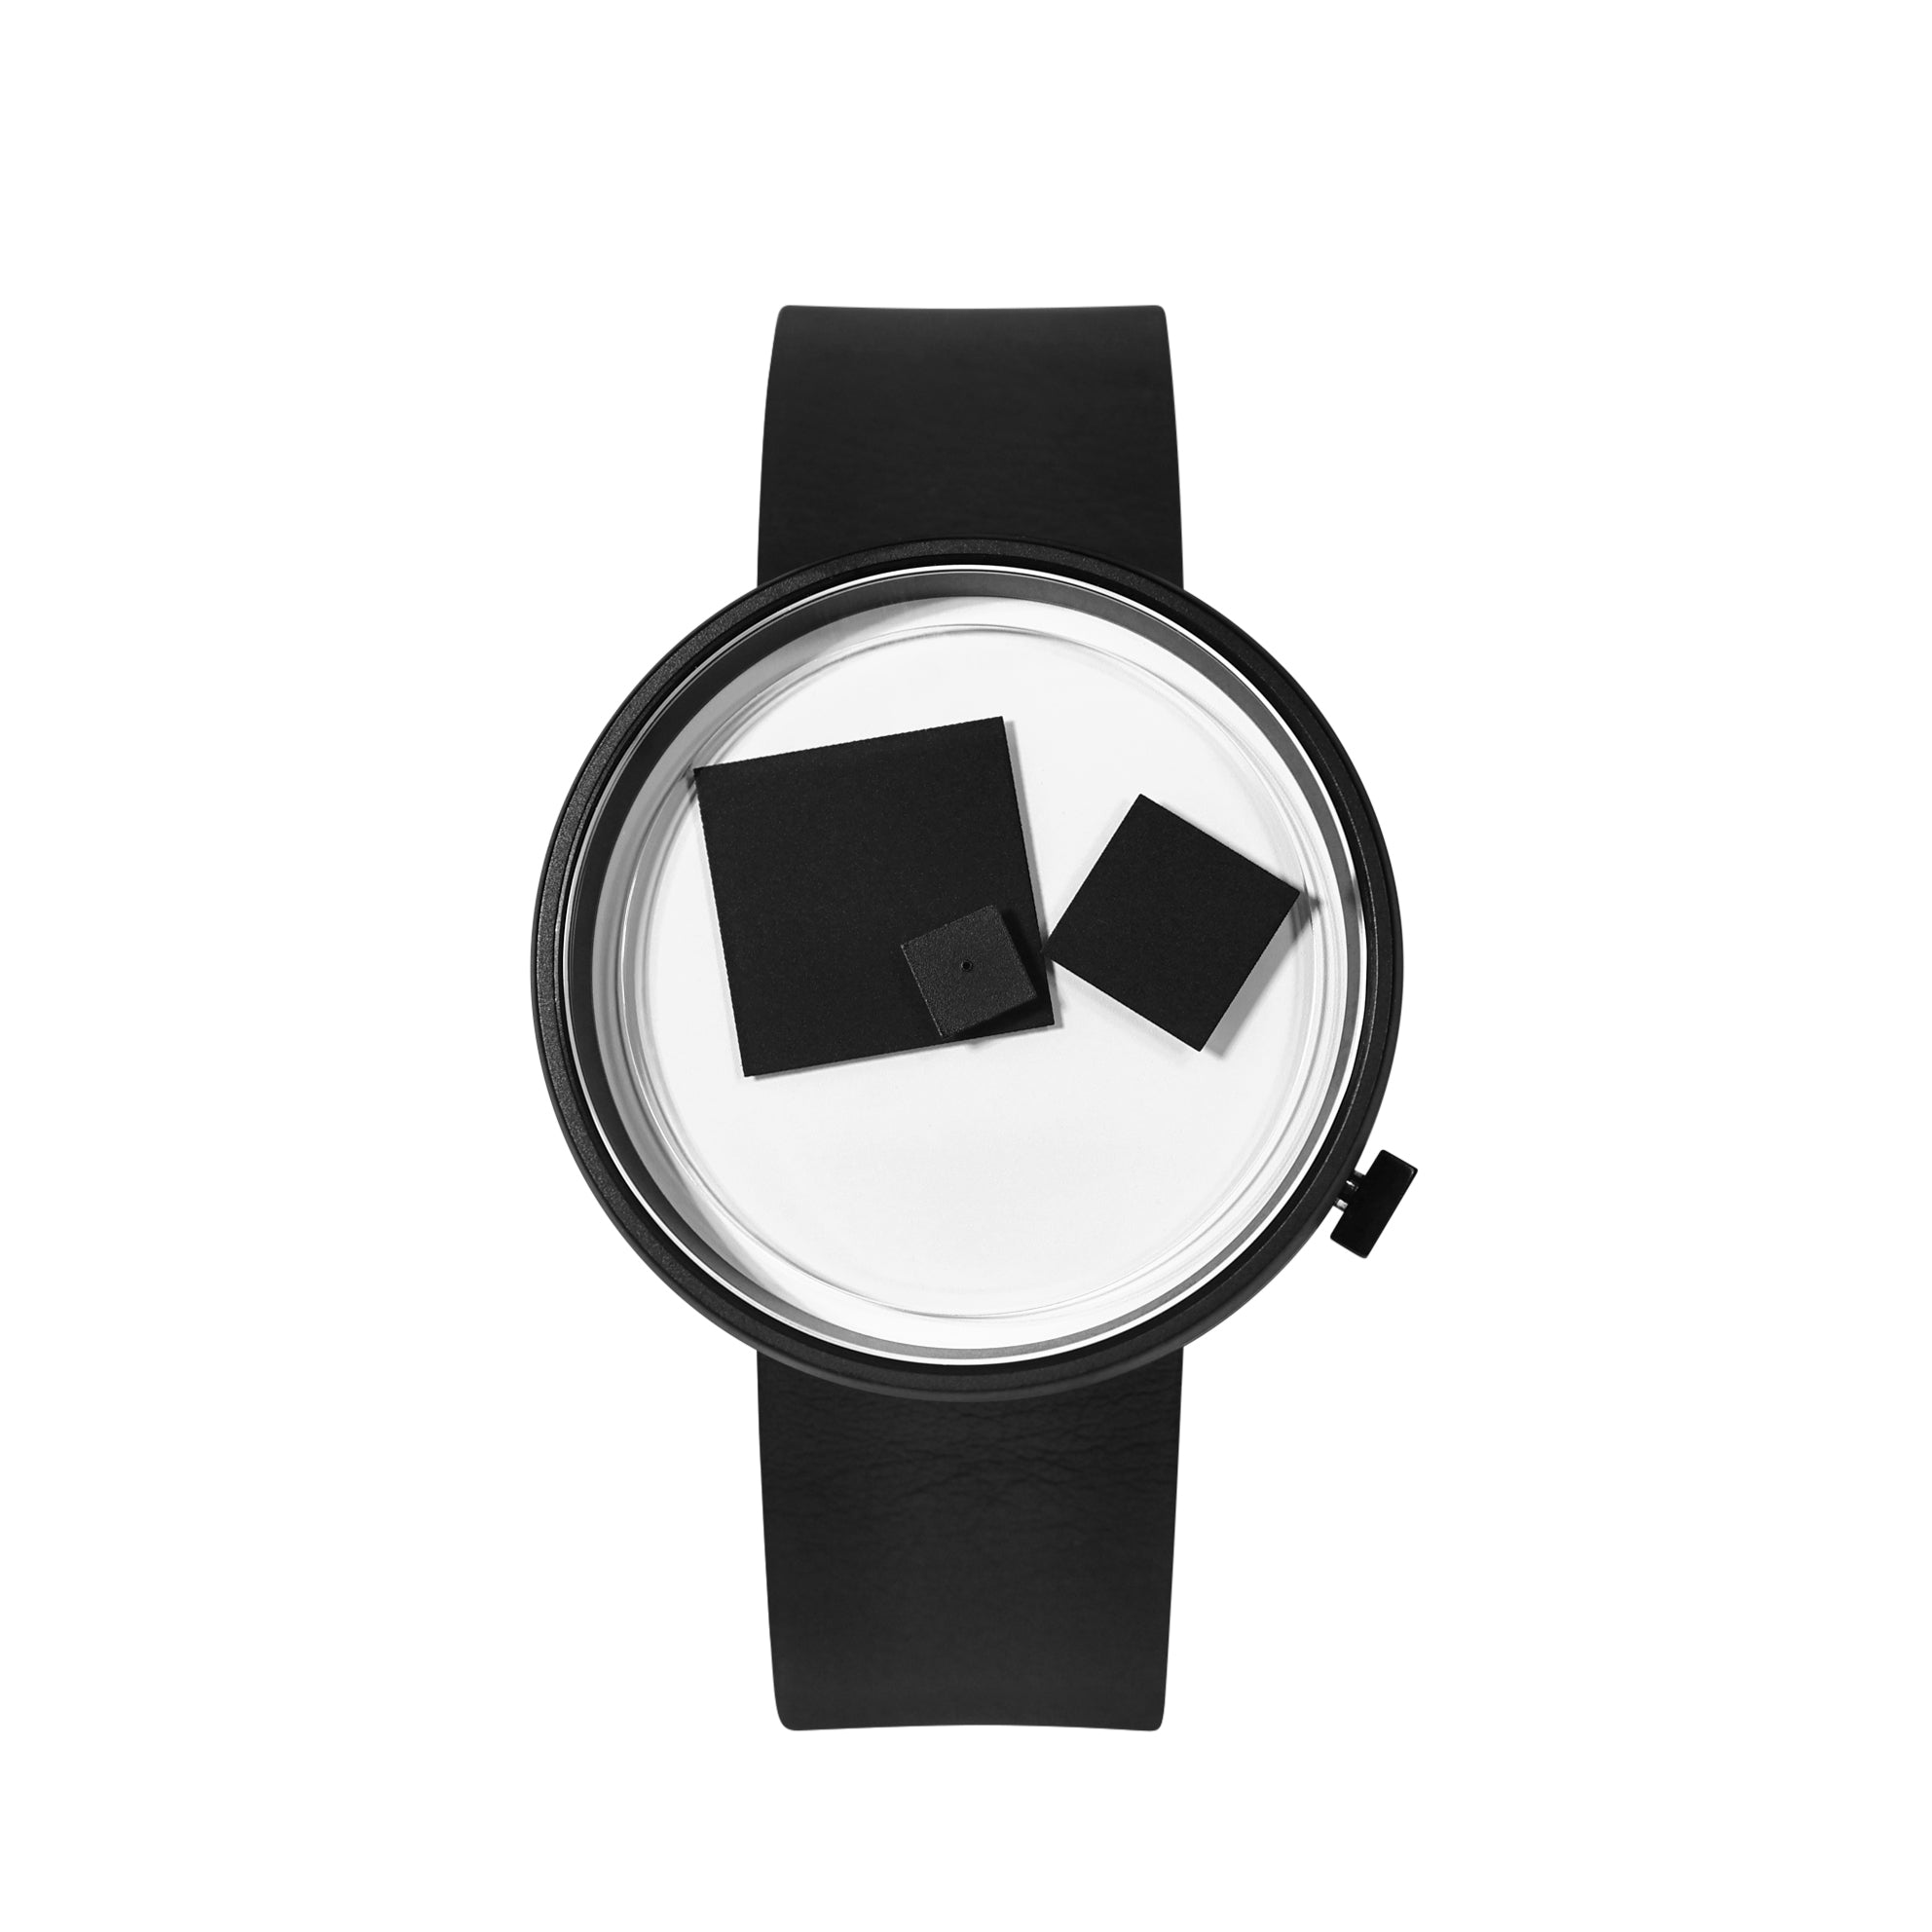 Bauhaus Black - Projects Watches